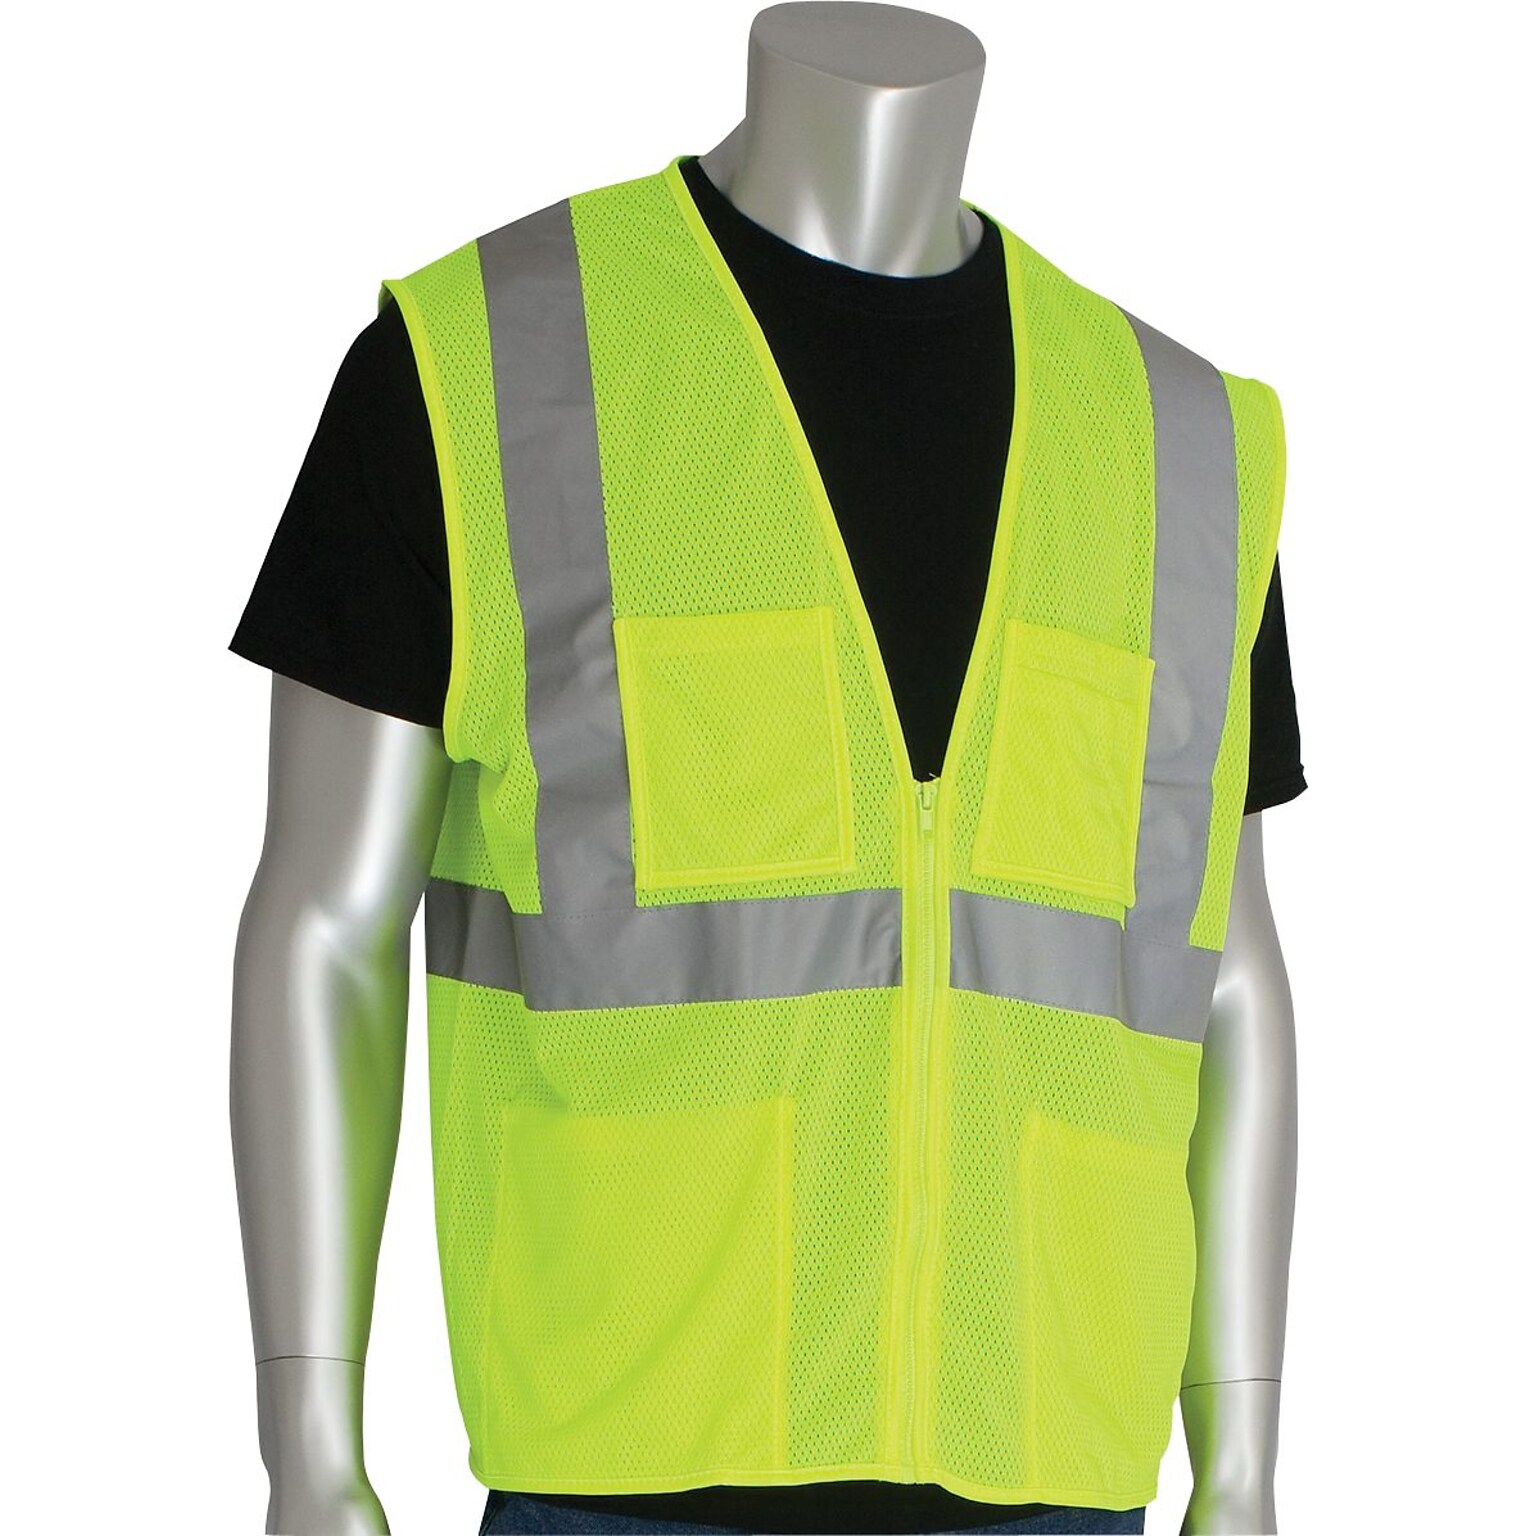 Protective Industrial Products High Visibility Sleeveless Safety Vest, ANSI Class R2, Lime Yellow, 5XL (302-MVGZ4PLY-5X)